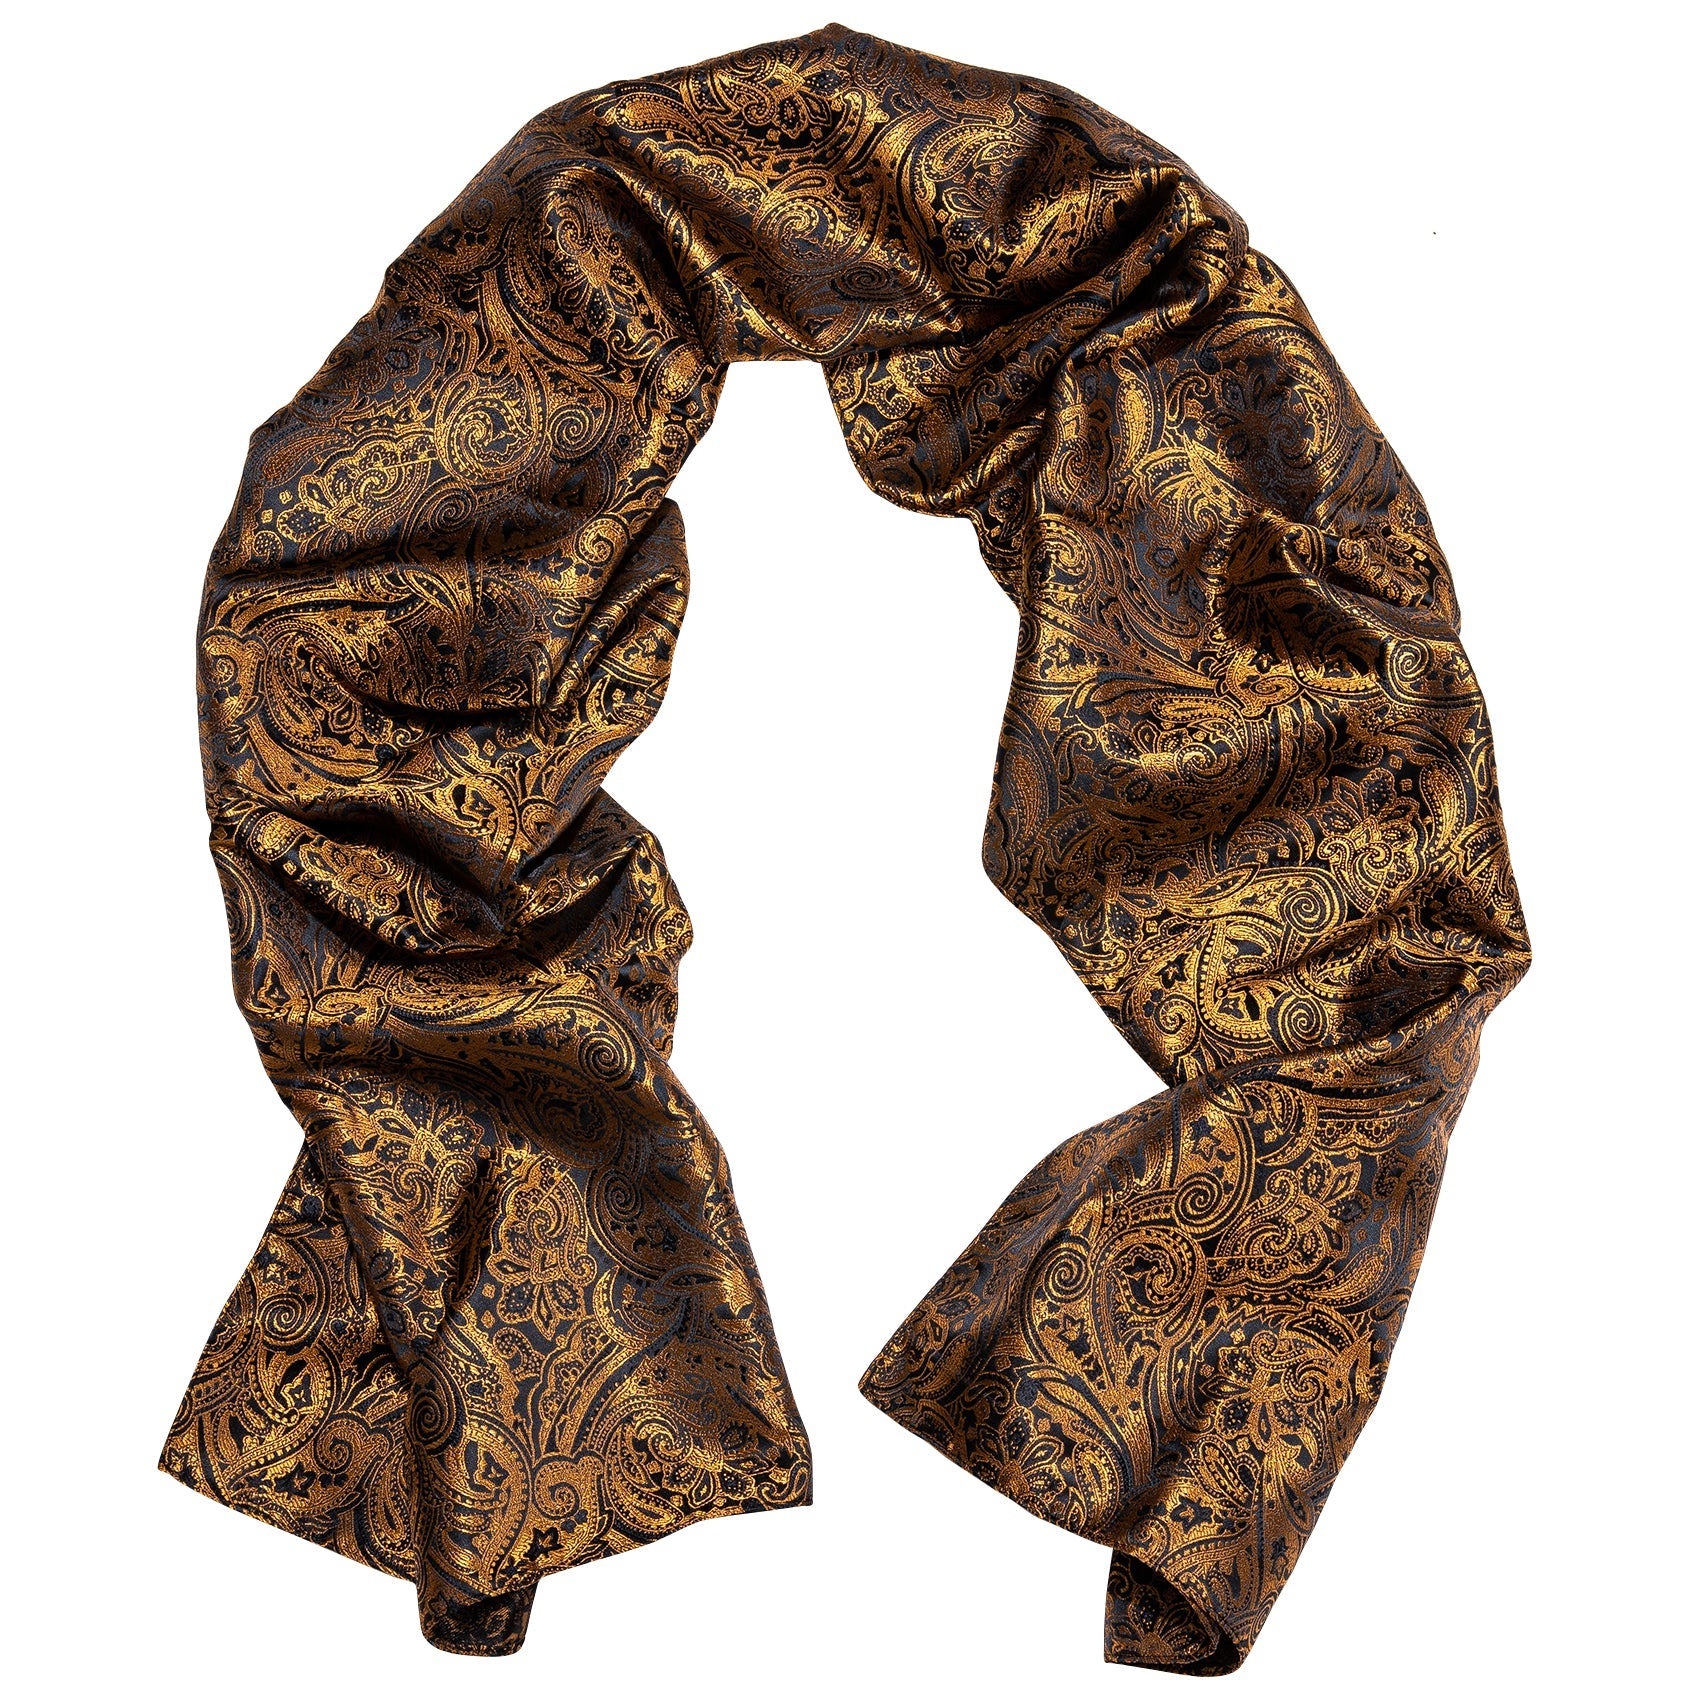 Shining Gold Black Floral Scarf with Tie